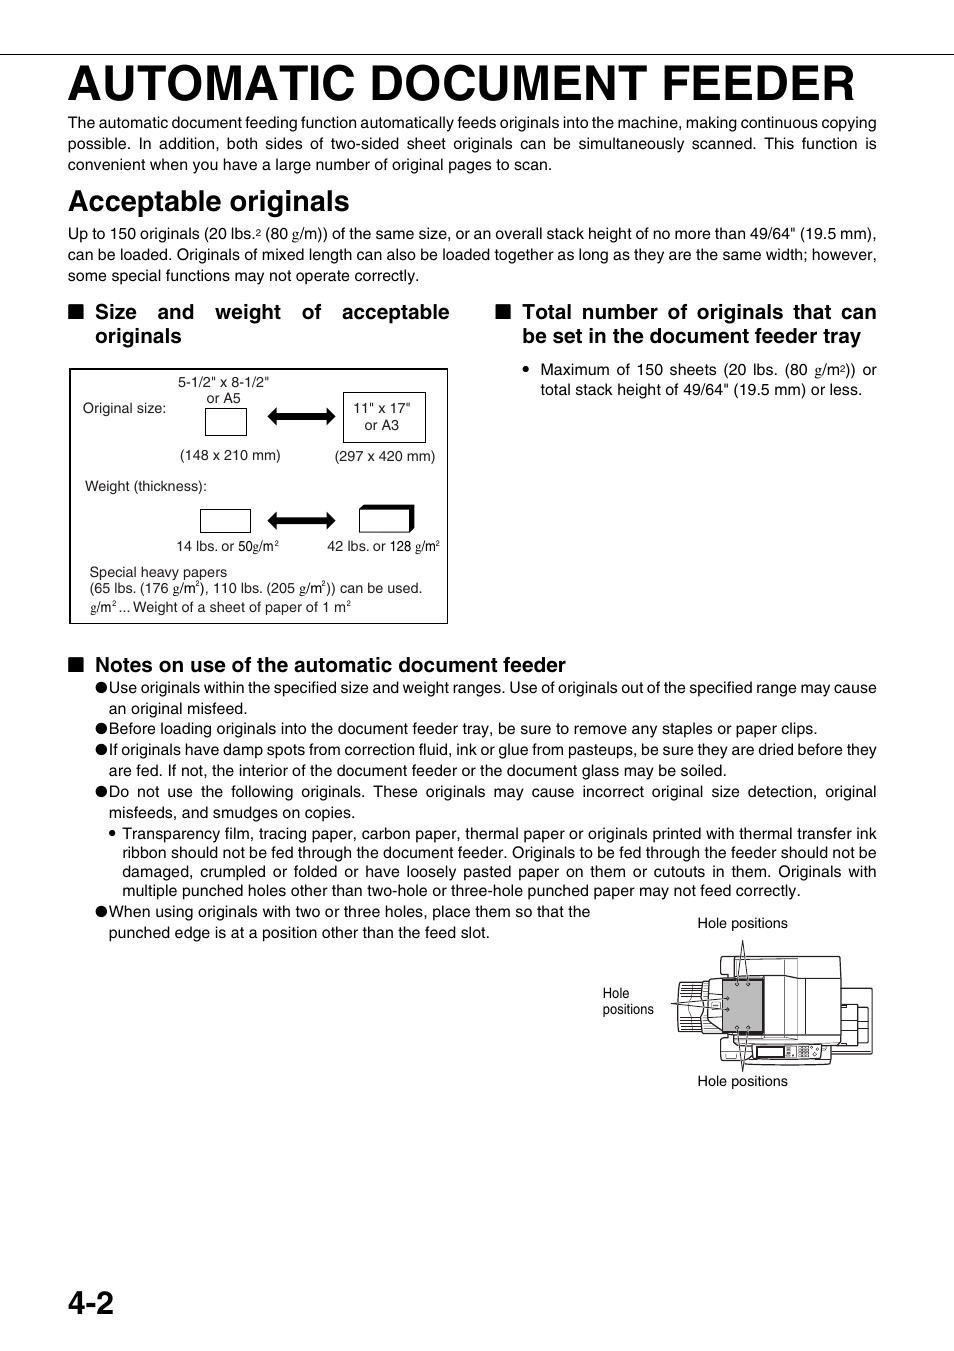 Automatic document feeder, Acceptable originals, Size and weight of acceptable originals | Notes on use of the automatic document feeder | Sharp AR-M700N User Manual | Page 78 / 172